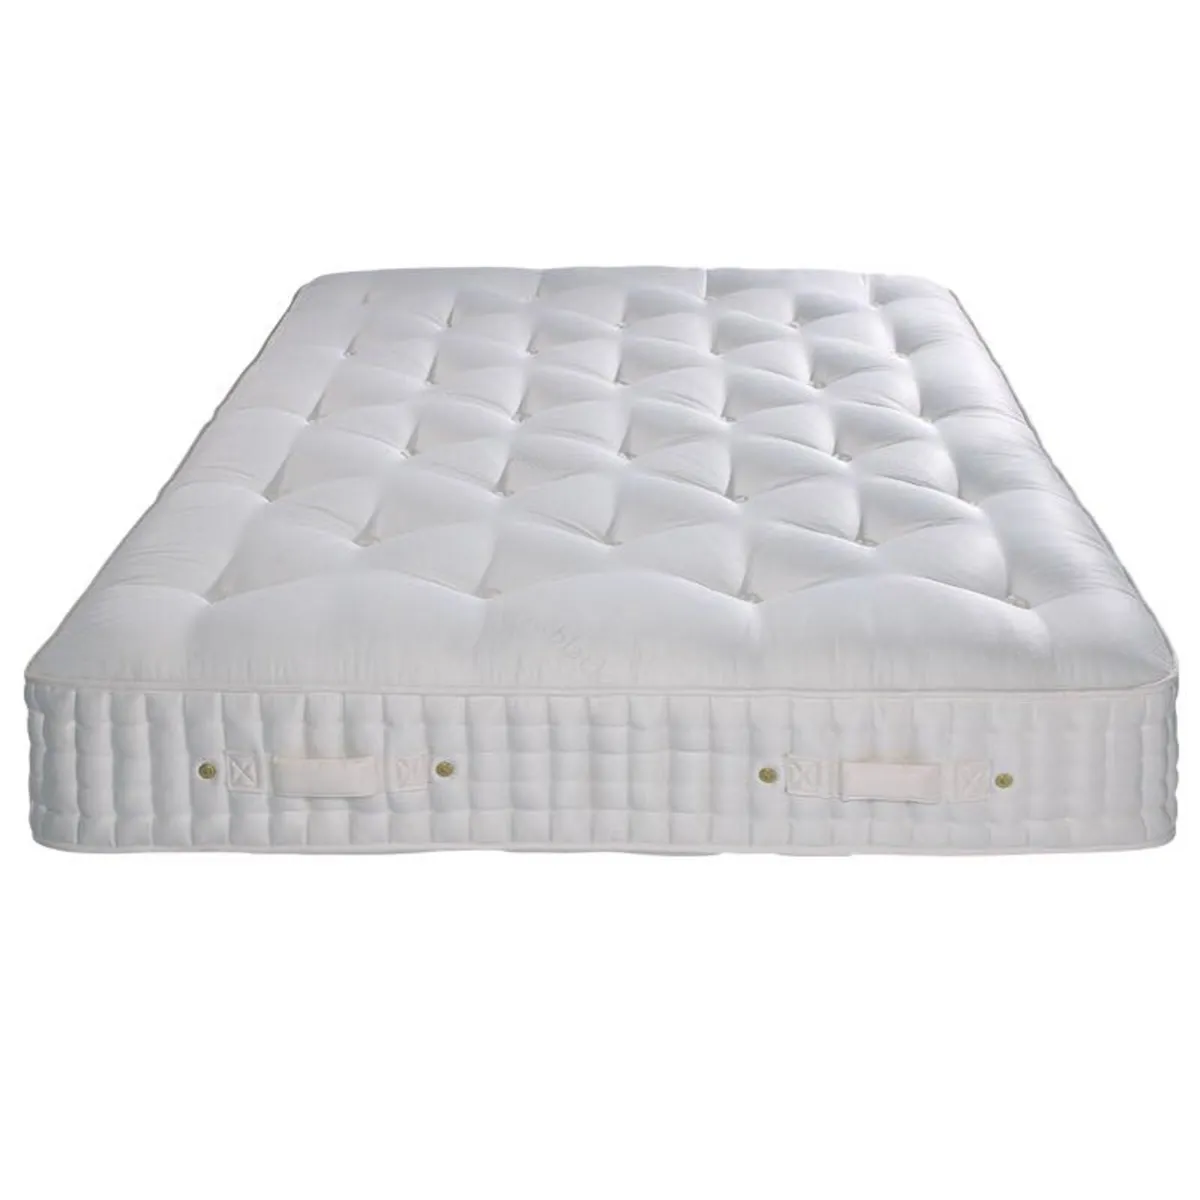 Brand new memory foam beds nationwide 70% of - Image 1